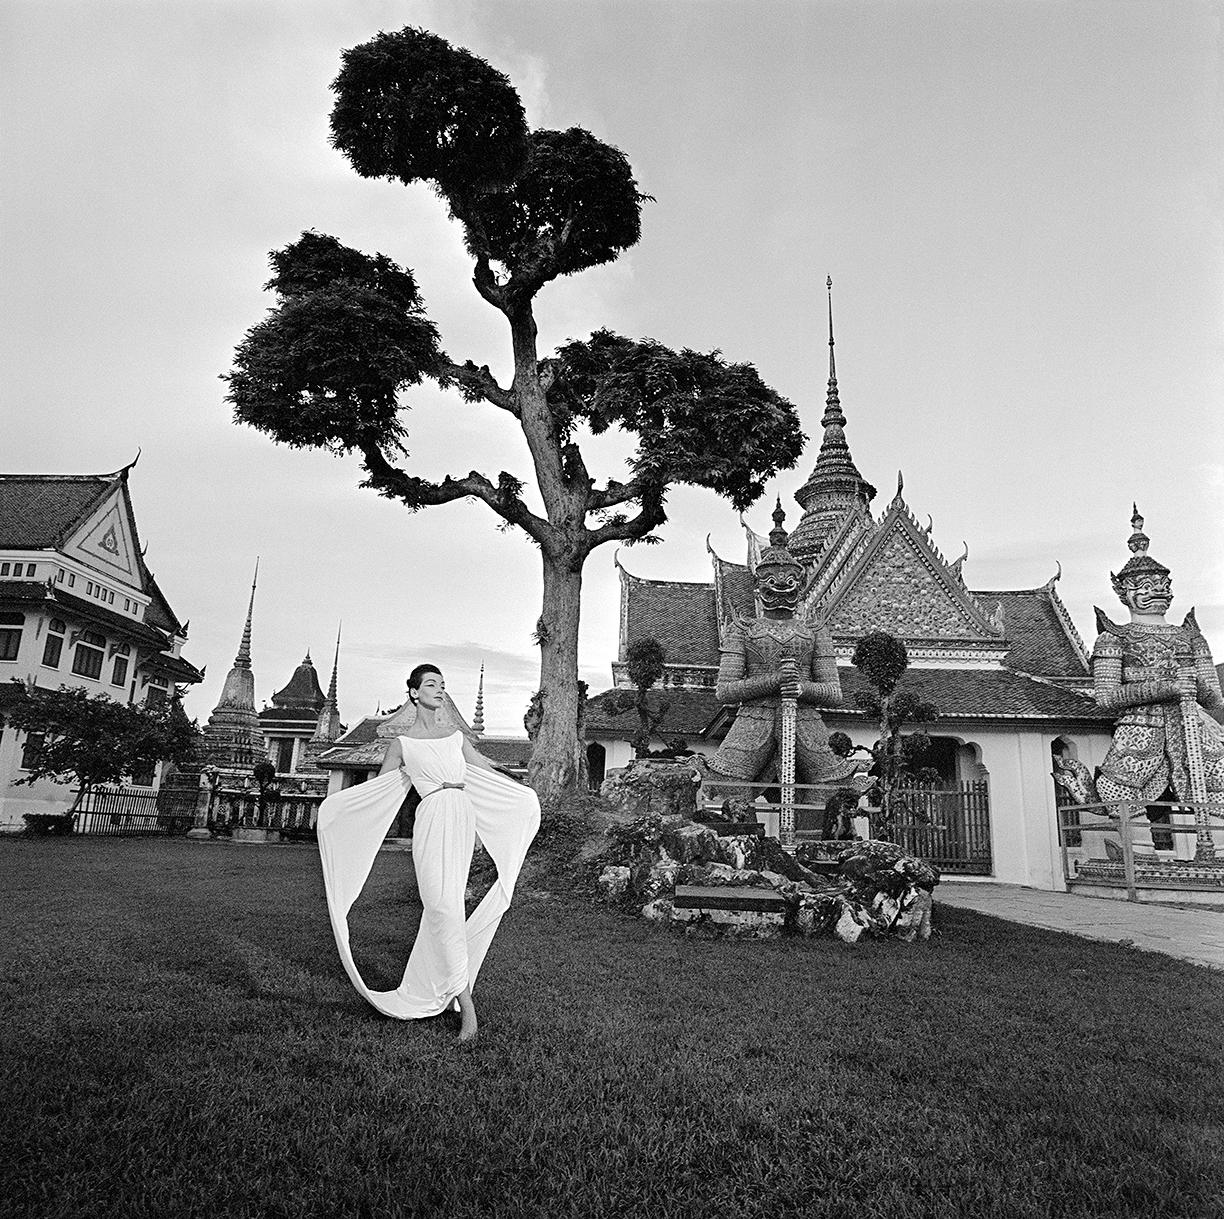 Selected from the Derujinsky: Around The World Portfolio, shot at the Grand Palace in Thailand for Harper's Bazaar

Artist: Gleb Derujinsky

Title: Fragrant Harbor

Year: 1957

Estate Edition: signed, stamped and numbered on verso. Signed by Andrea